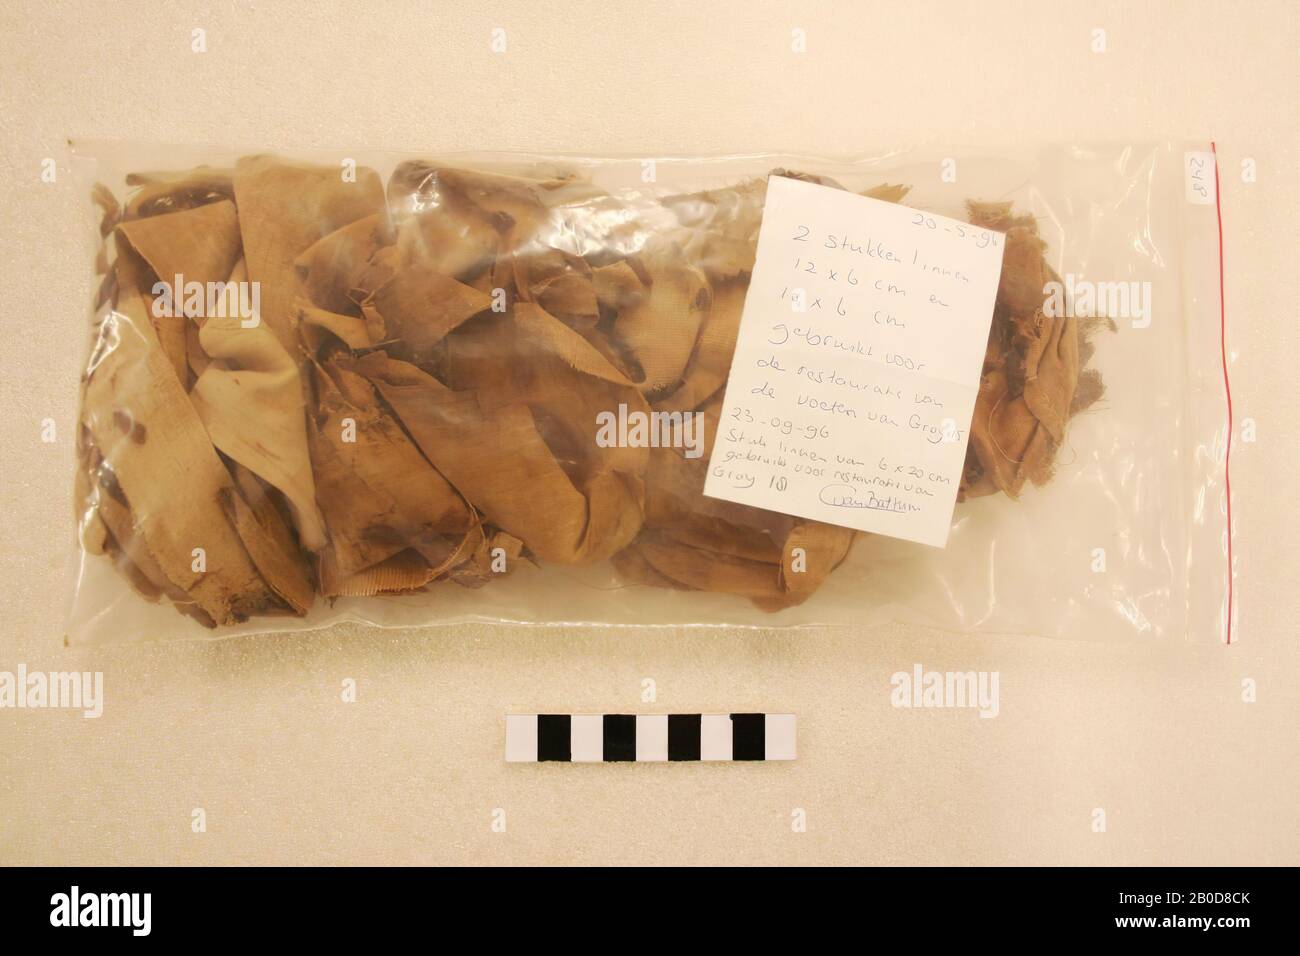 Fragments of mummy wrappings. Sticker on bag: '248'. Note: '20 -5-'96, 2 pieces of linen 12 x 6 cm and 10 x 6 cm used for the restoration of the feet of Gray 15. 23-09-'96, piece of linen of 6 x 20 cm used for restoration from Gray 18. C. van Battum. ', cloth, fabric, linen, Egypt Stock Photo